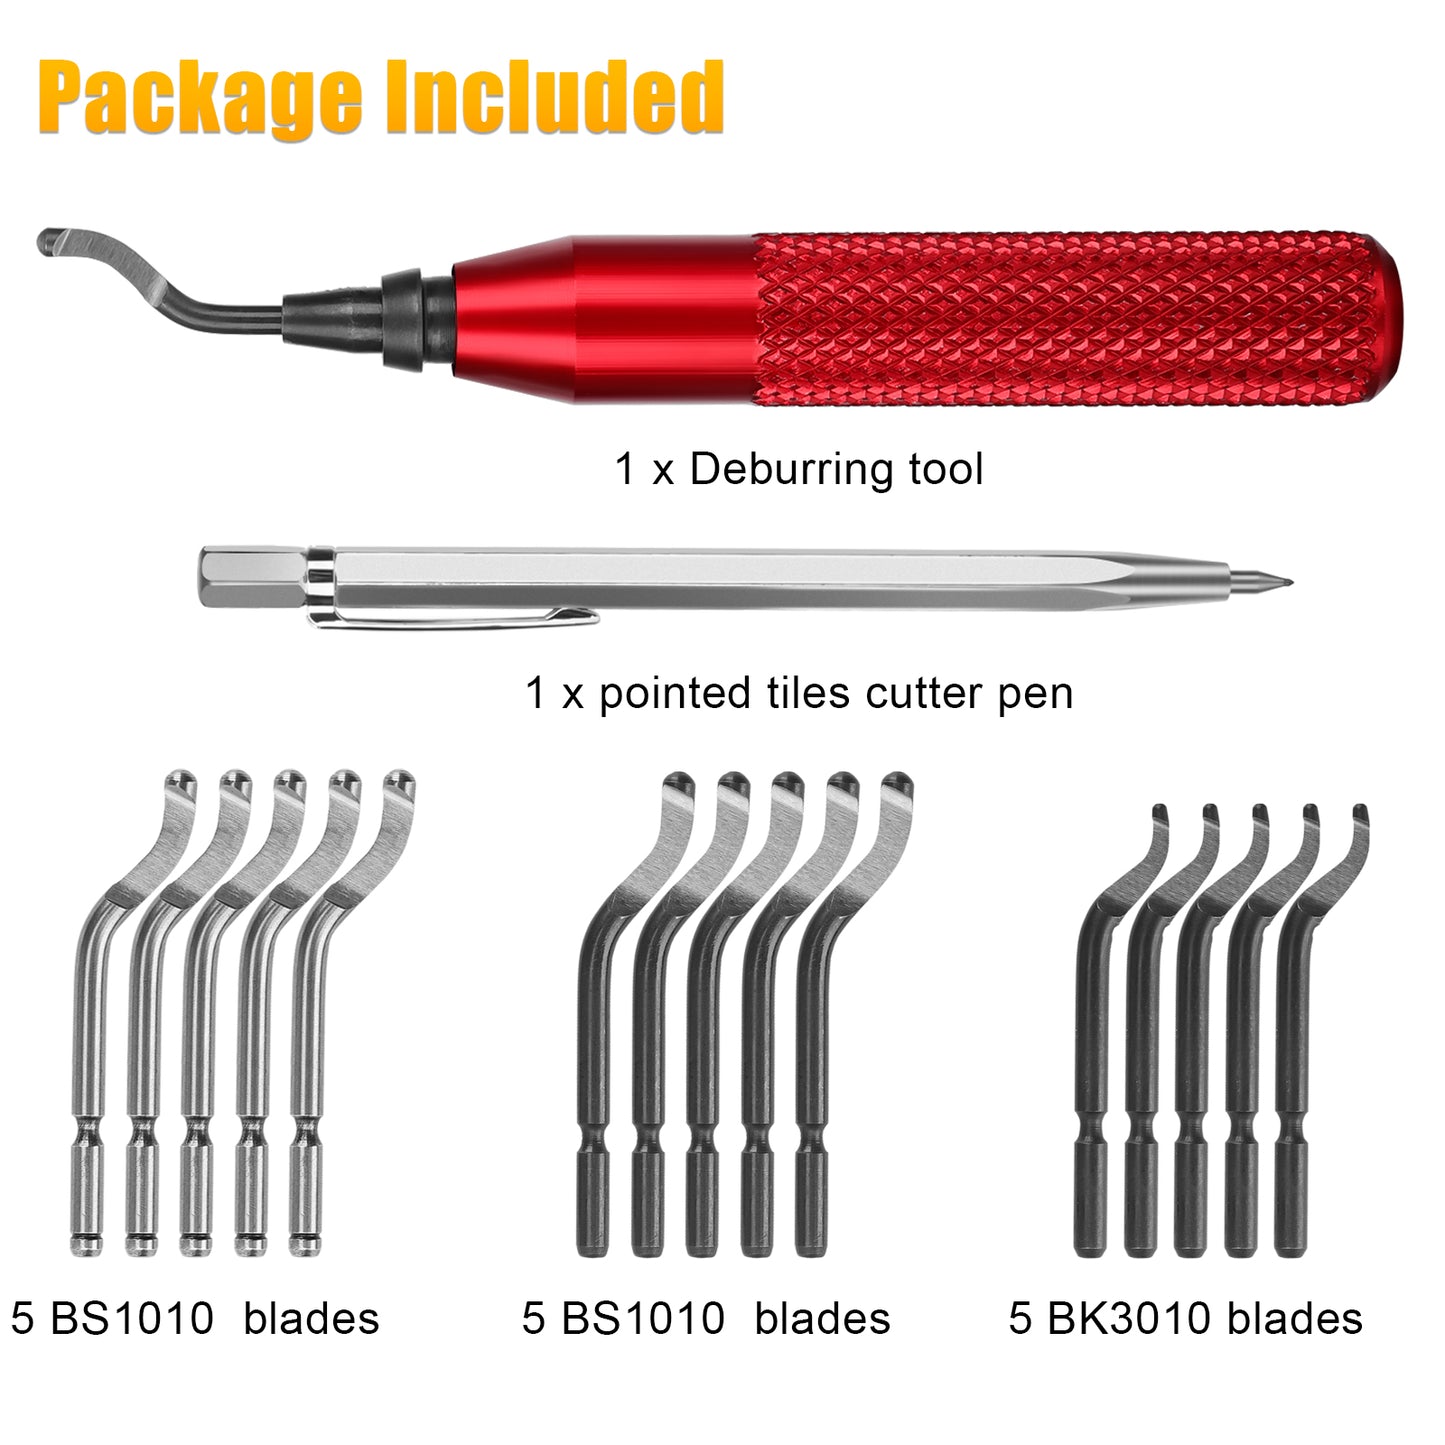 Deburring Tool Set - 15-Piece Blade Set for Metal, Wood, Plastic, and 3D Printing Finishing